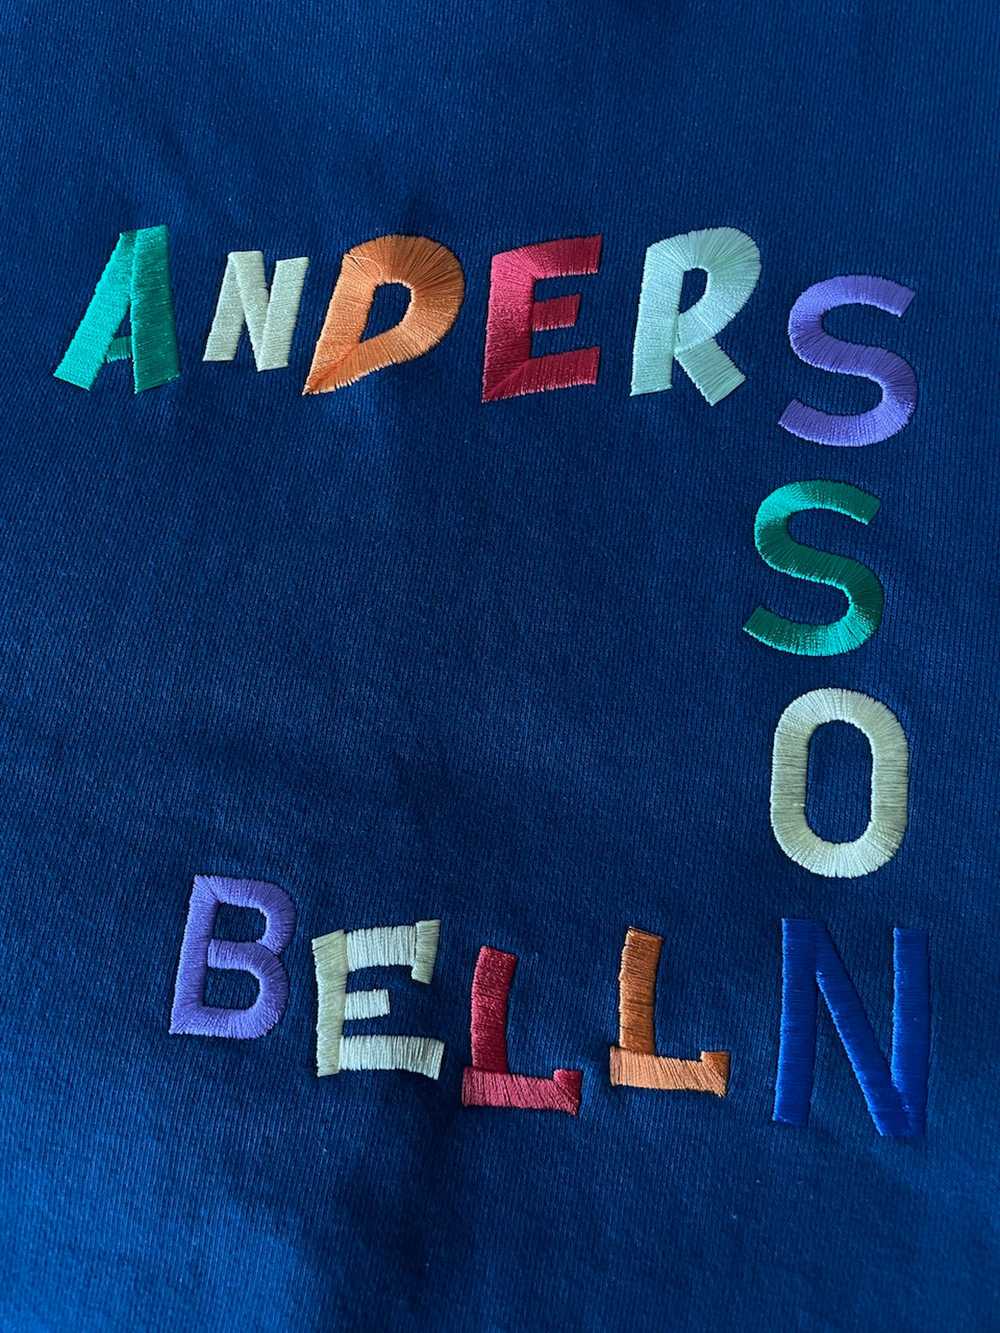 Andersson Bell Andersson Bell Logo Sweater - image 6